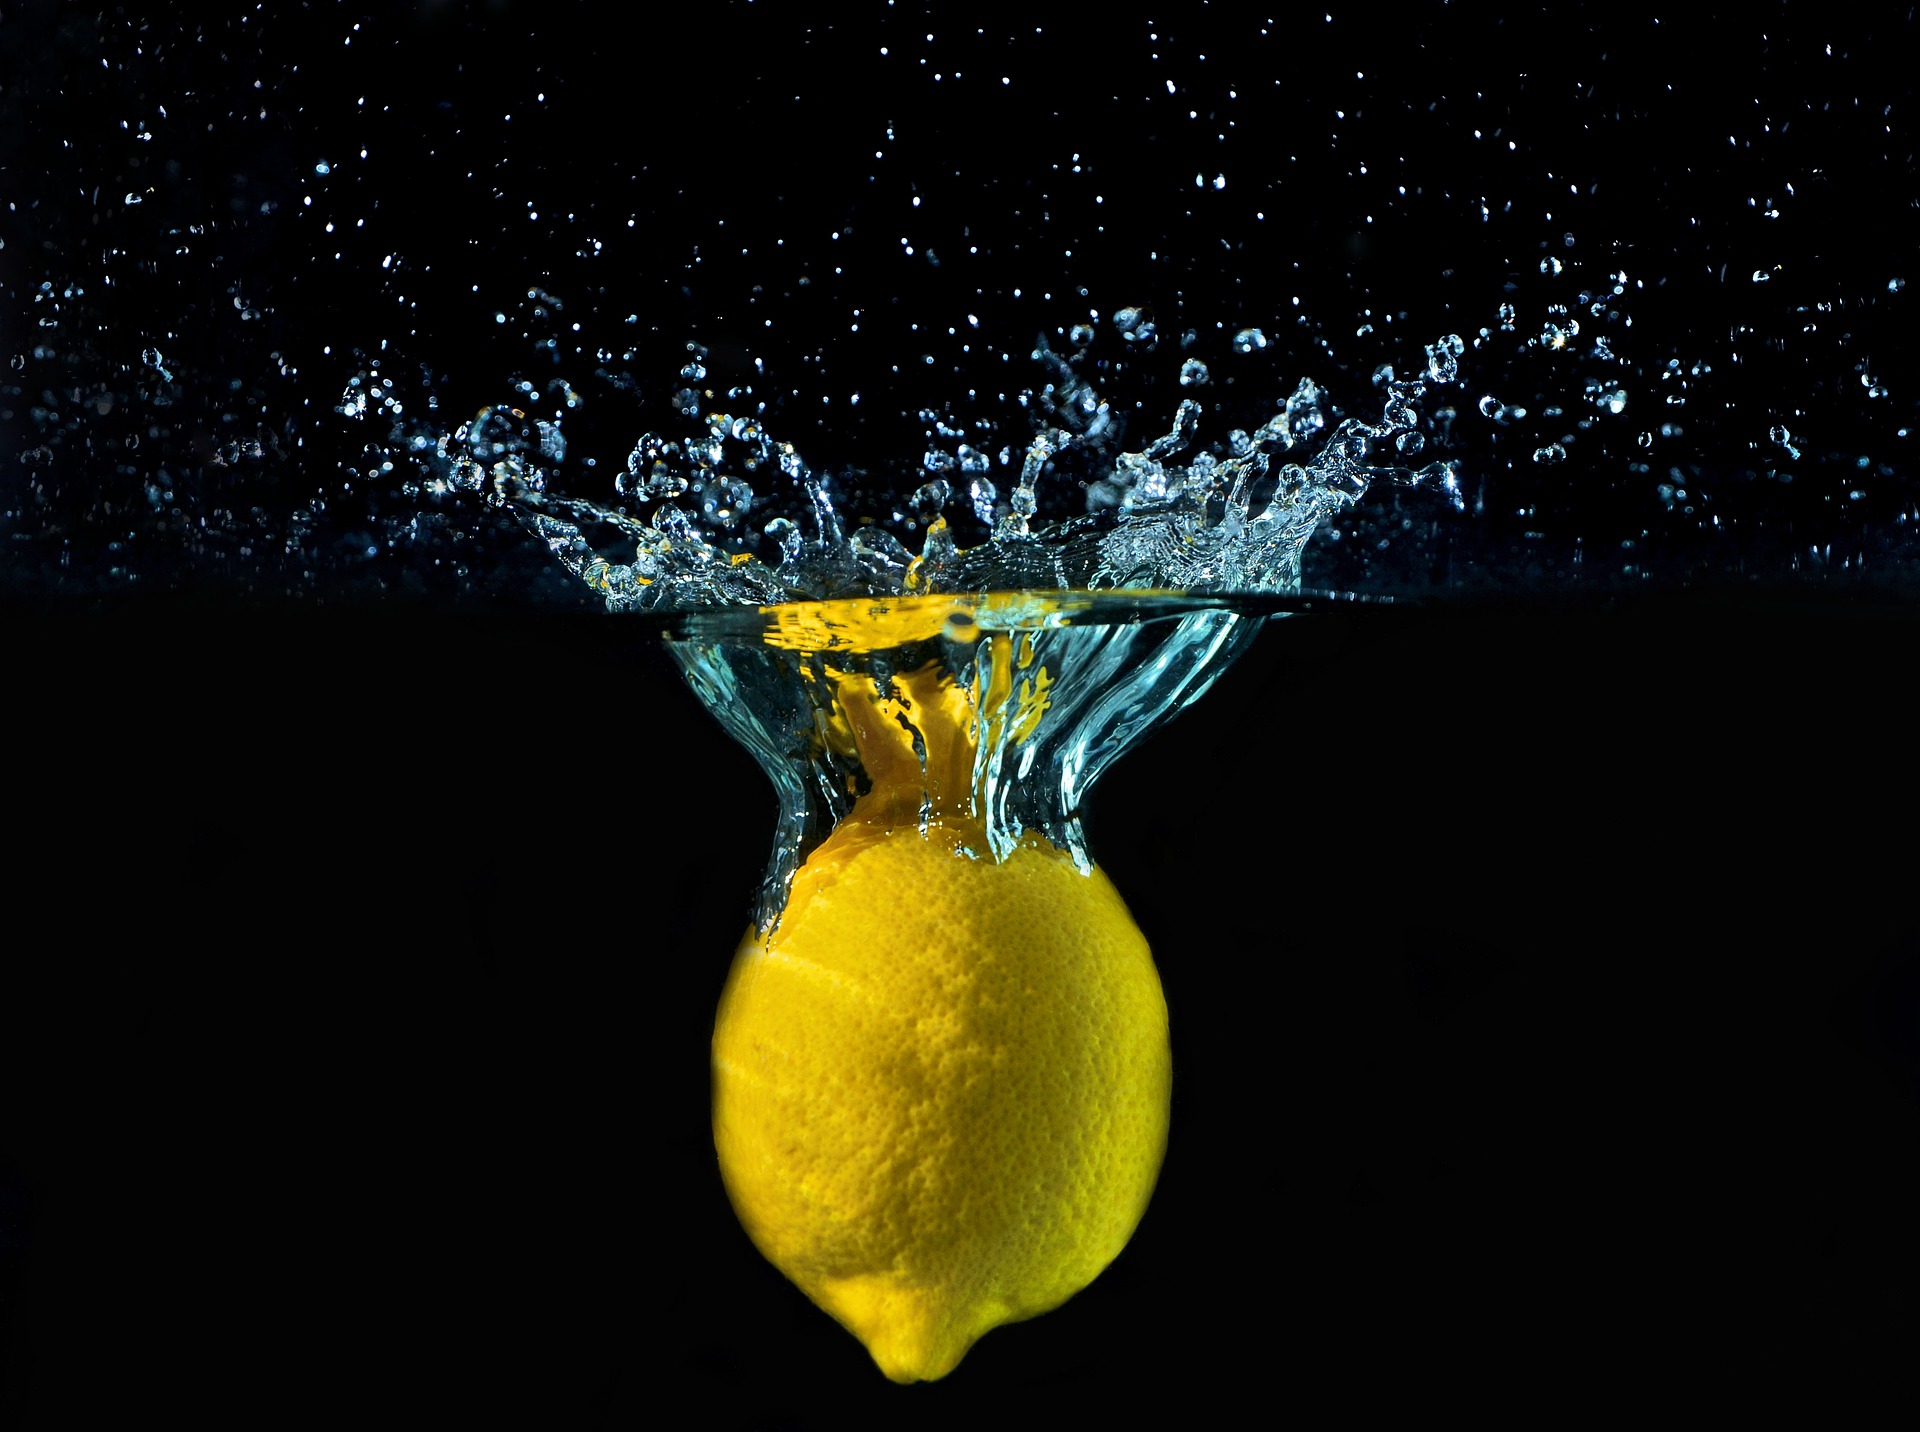 a lemon submerged in water